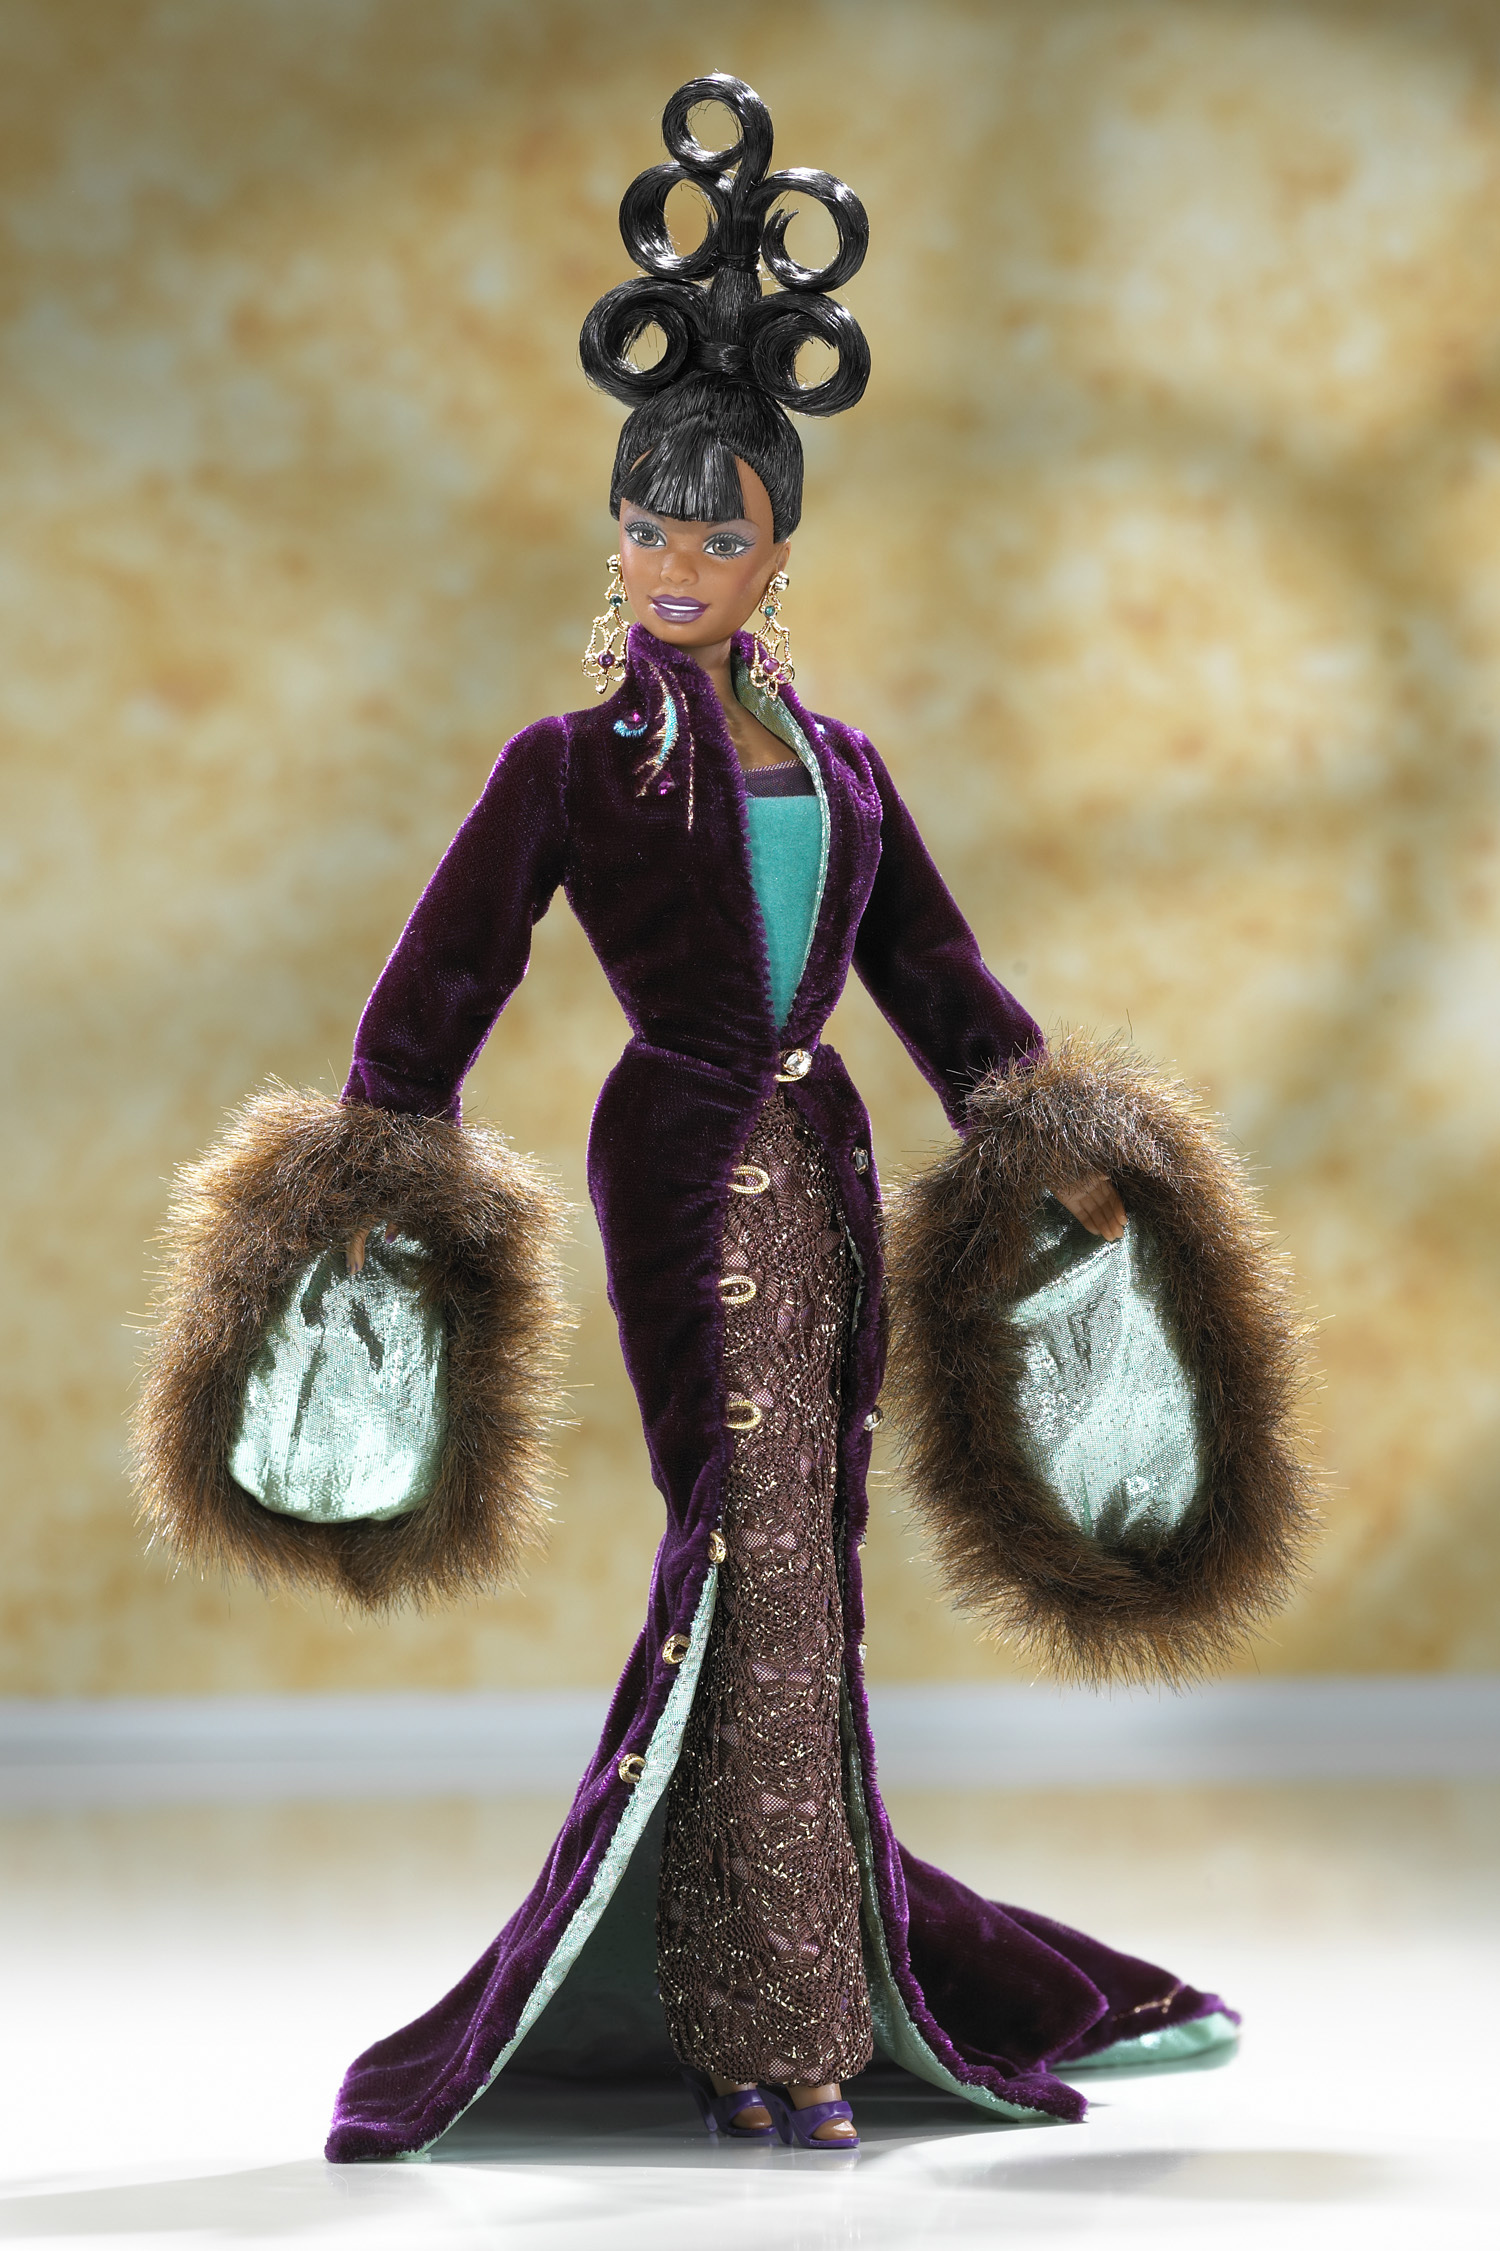 The Byron Lars Plum Royale Barbie Doll released in 1999.